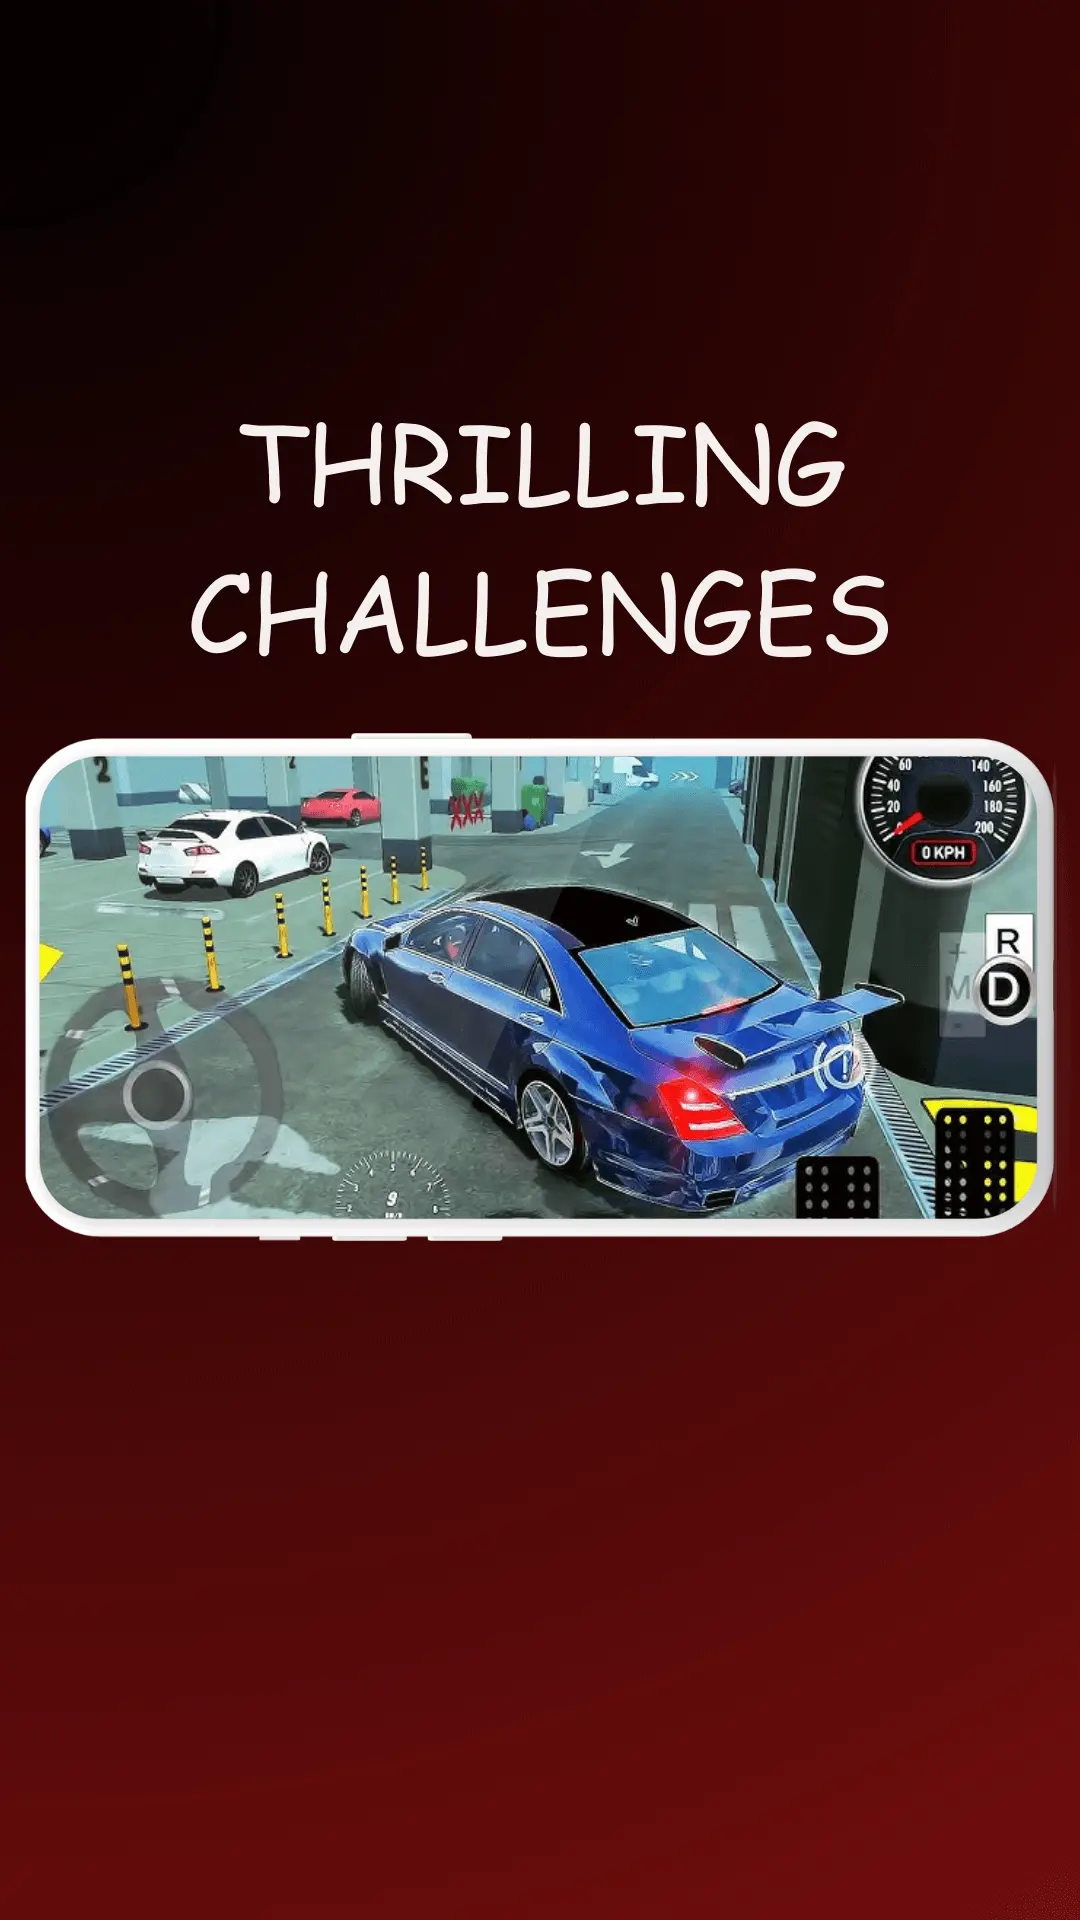 THRILLING CHALLENGES